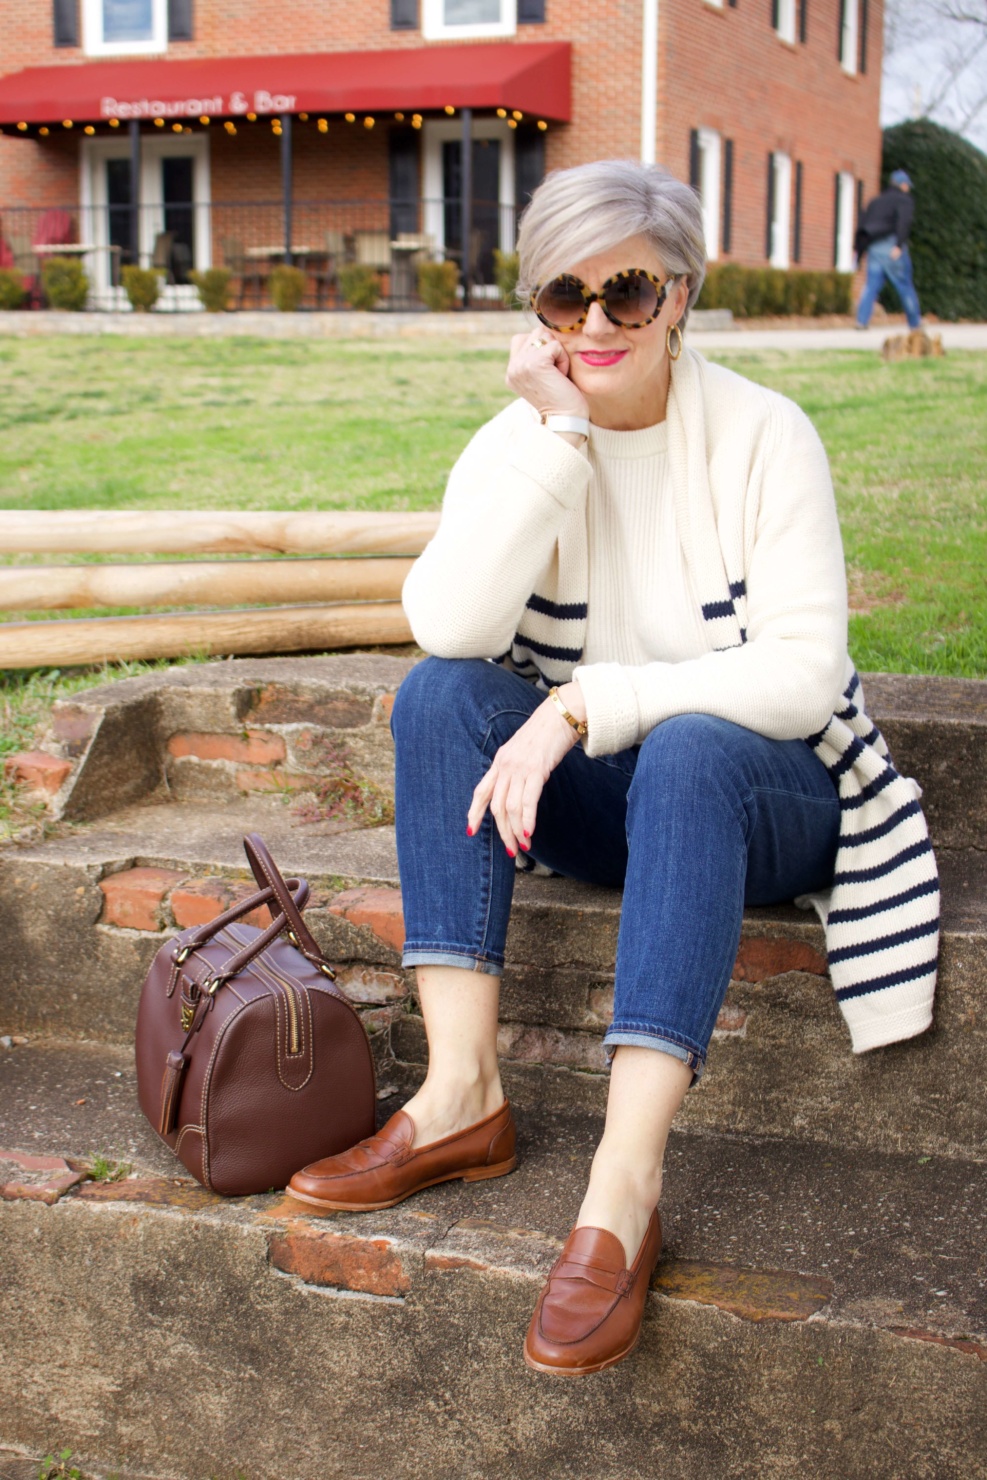 beth from Style at a Certain Age wears a J.Crew cozy striped cardigan, Everlane cashmere crewneck, Talbots girlfriend jeans, J.Crew Ryan loafers